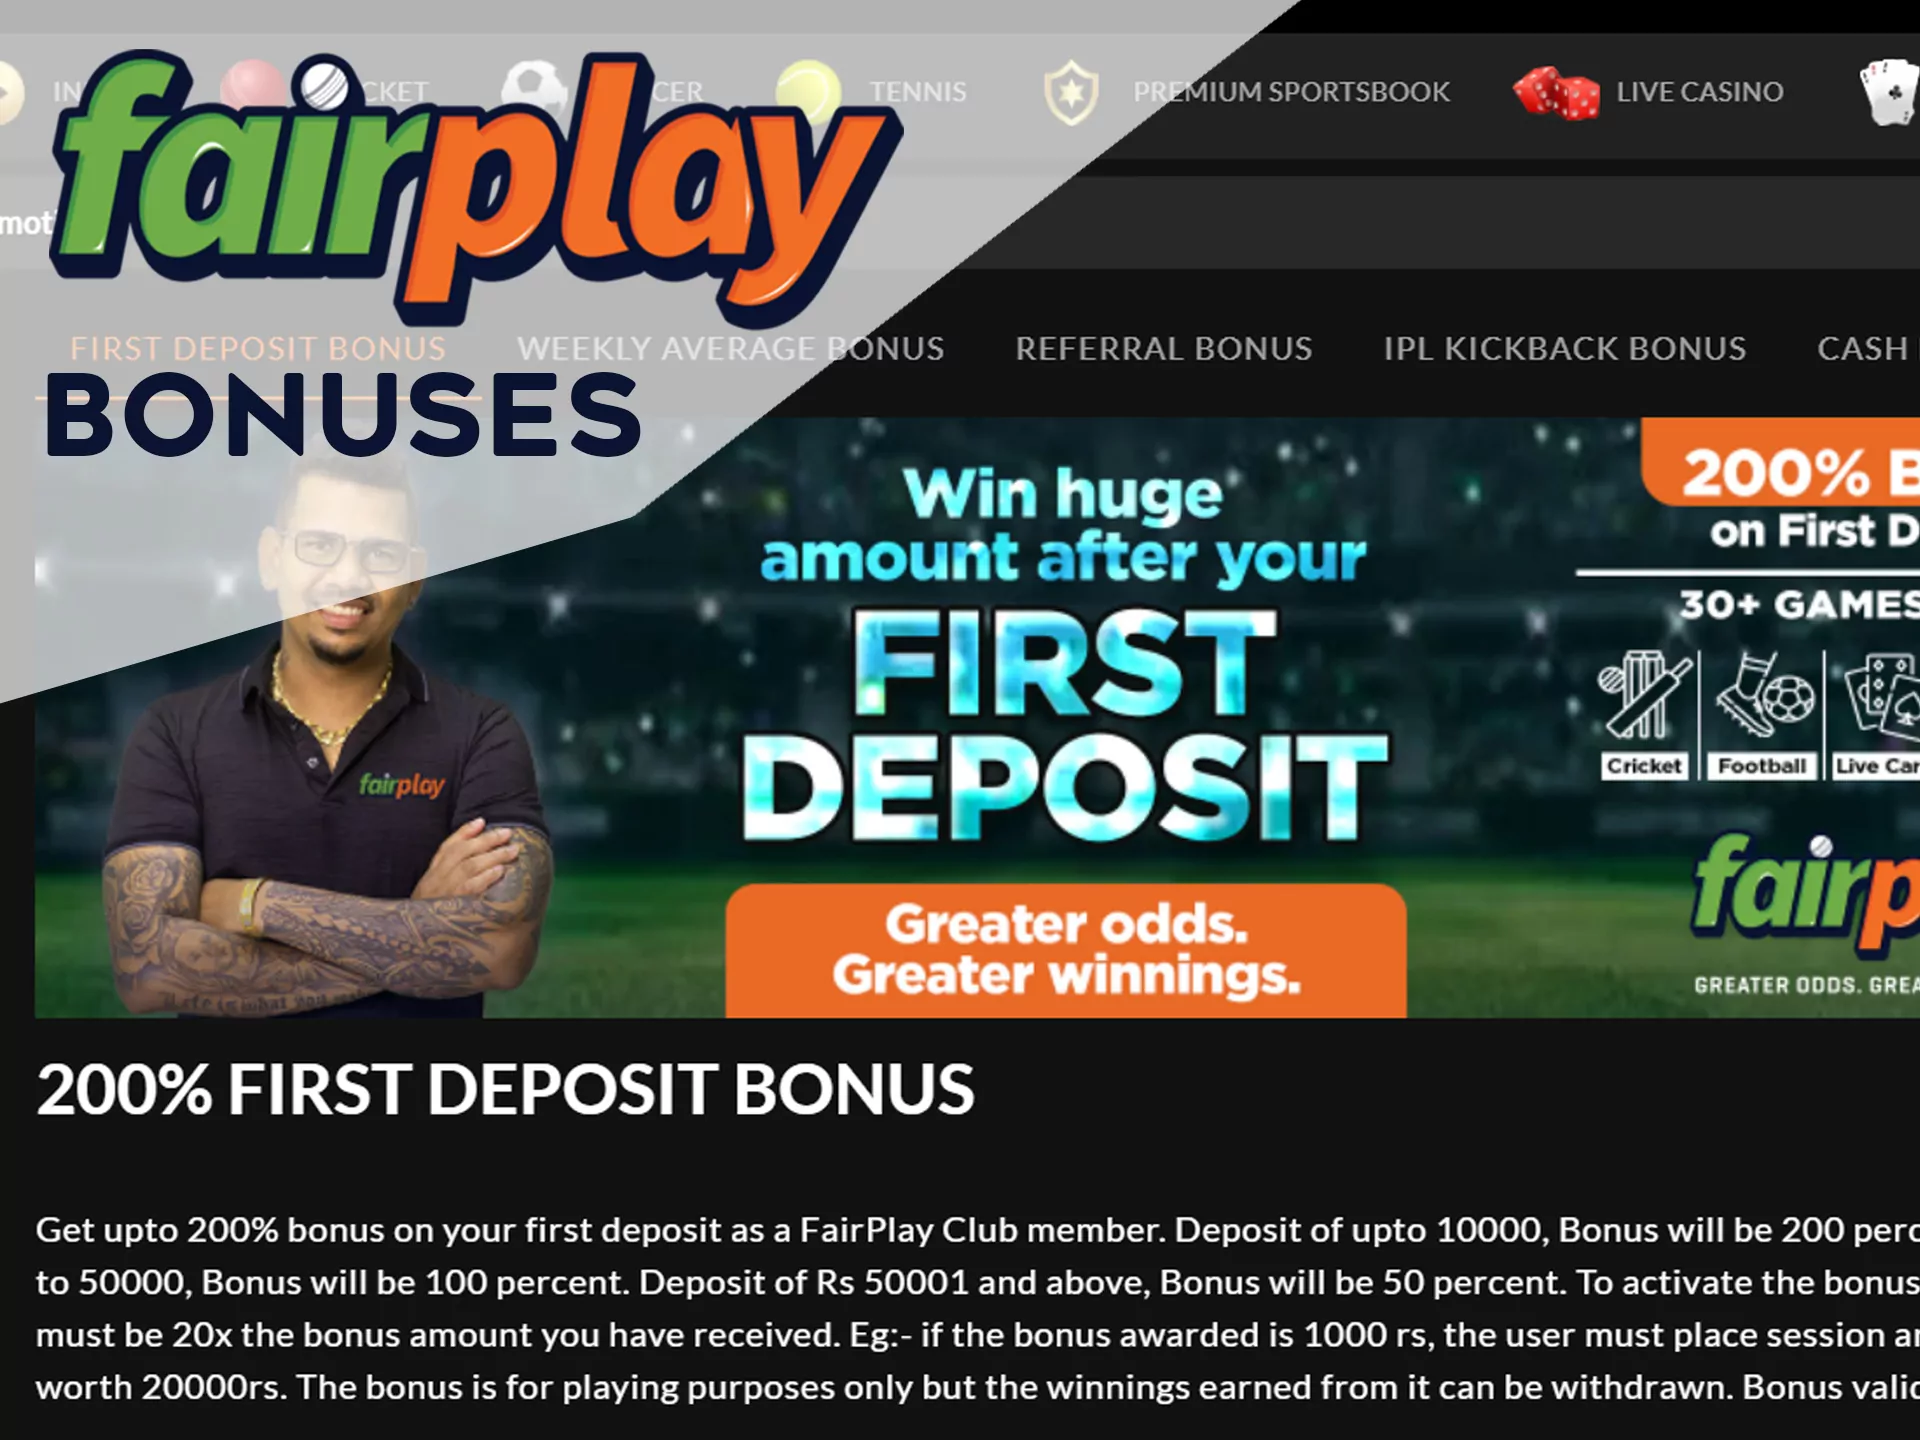 Fairplay offers lucrative bonuses for its players.